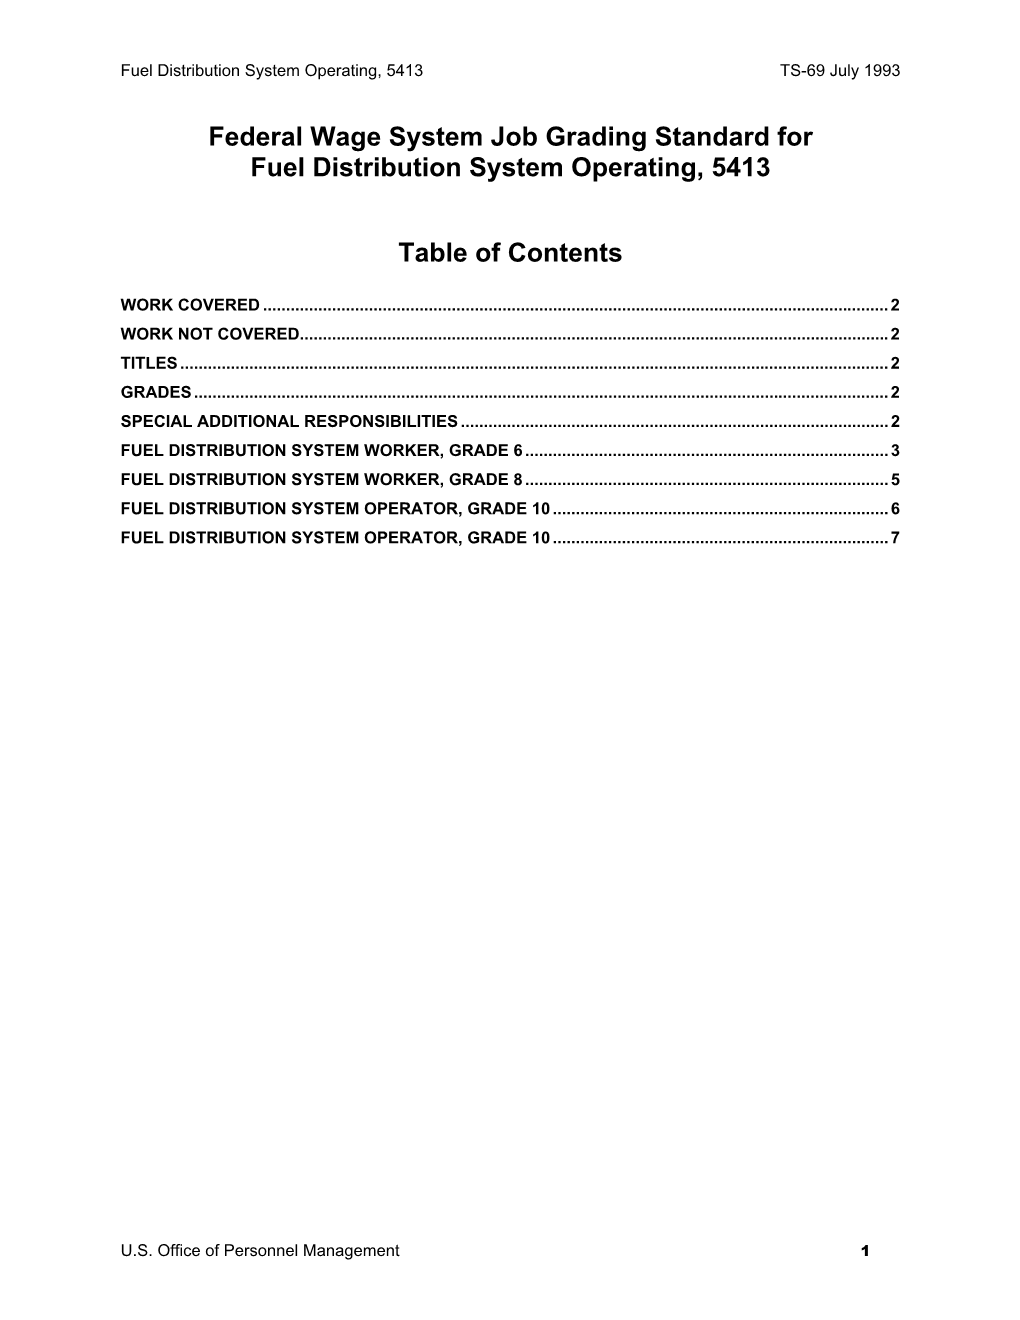 Federal Wage System Job Grading Standard for Fuel Distribution System Operating, 5413